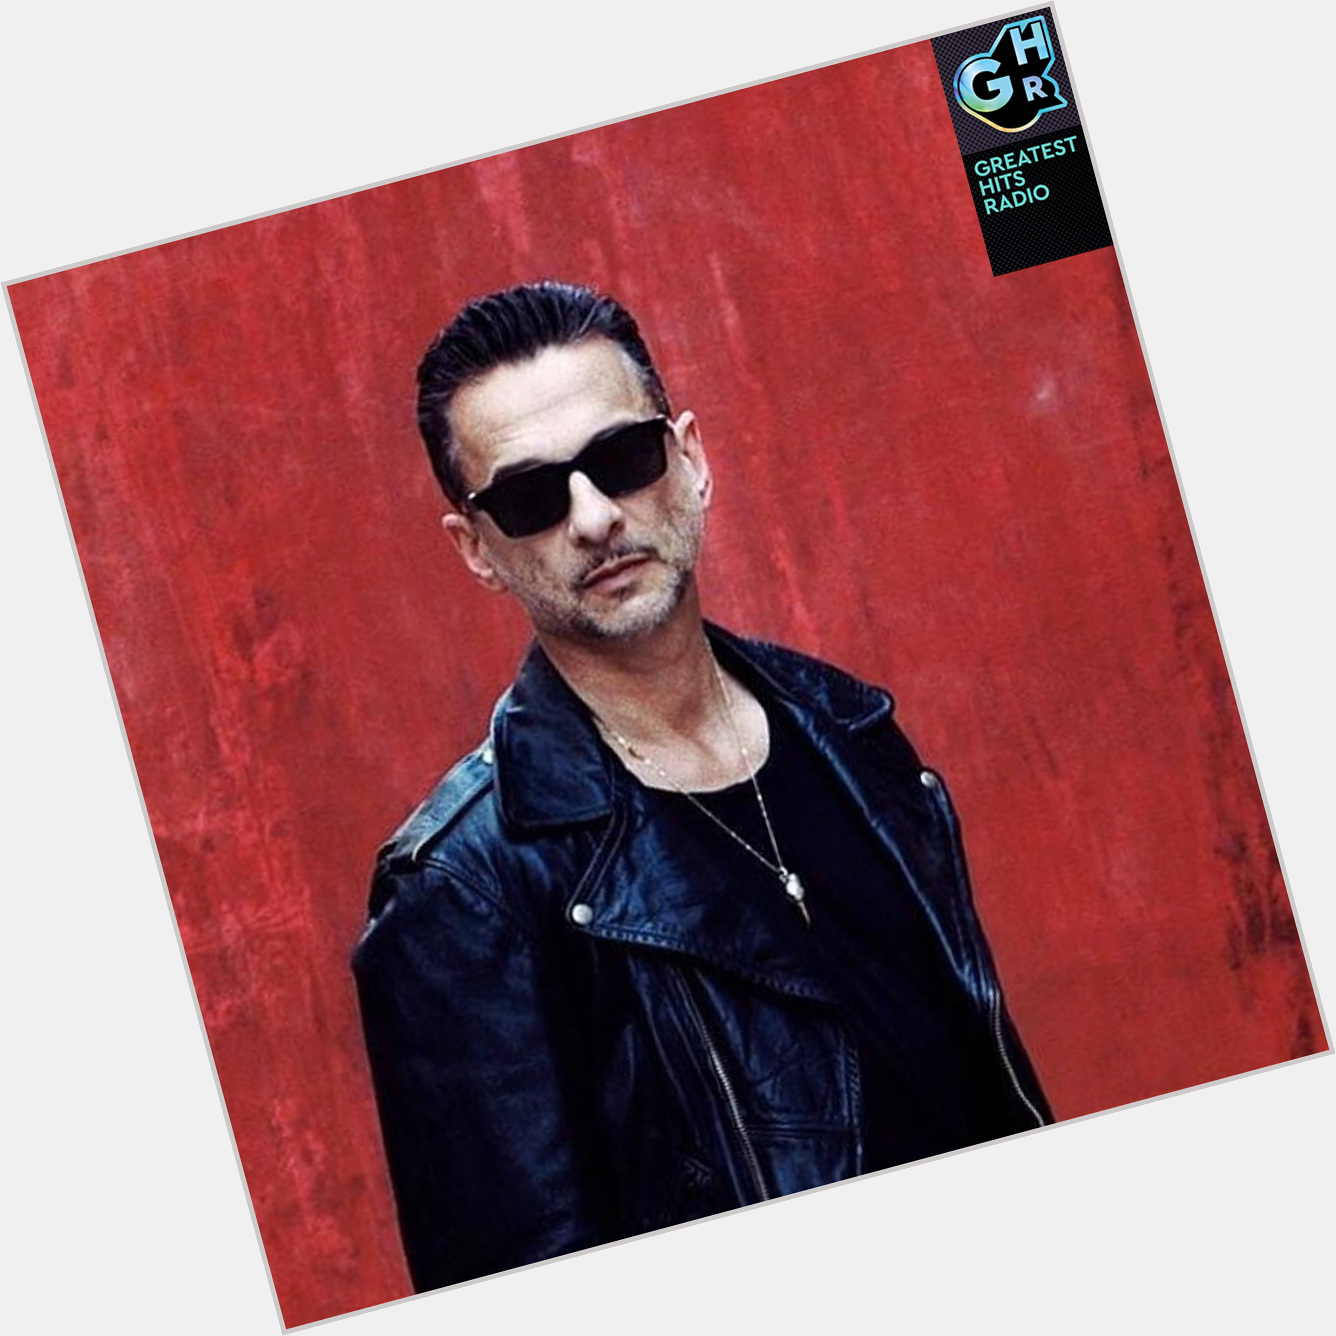 Wishing a Happy Birthday to frontman, Dave Gahan! Do you have a favourite Depeche Mode song? 